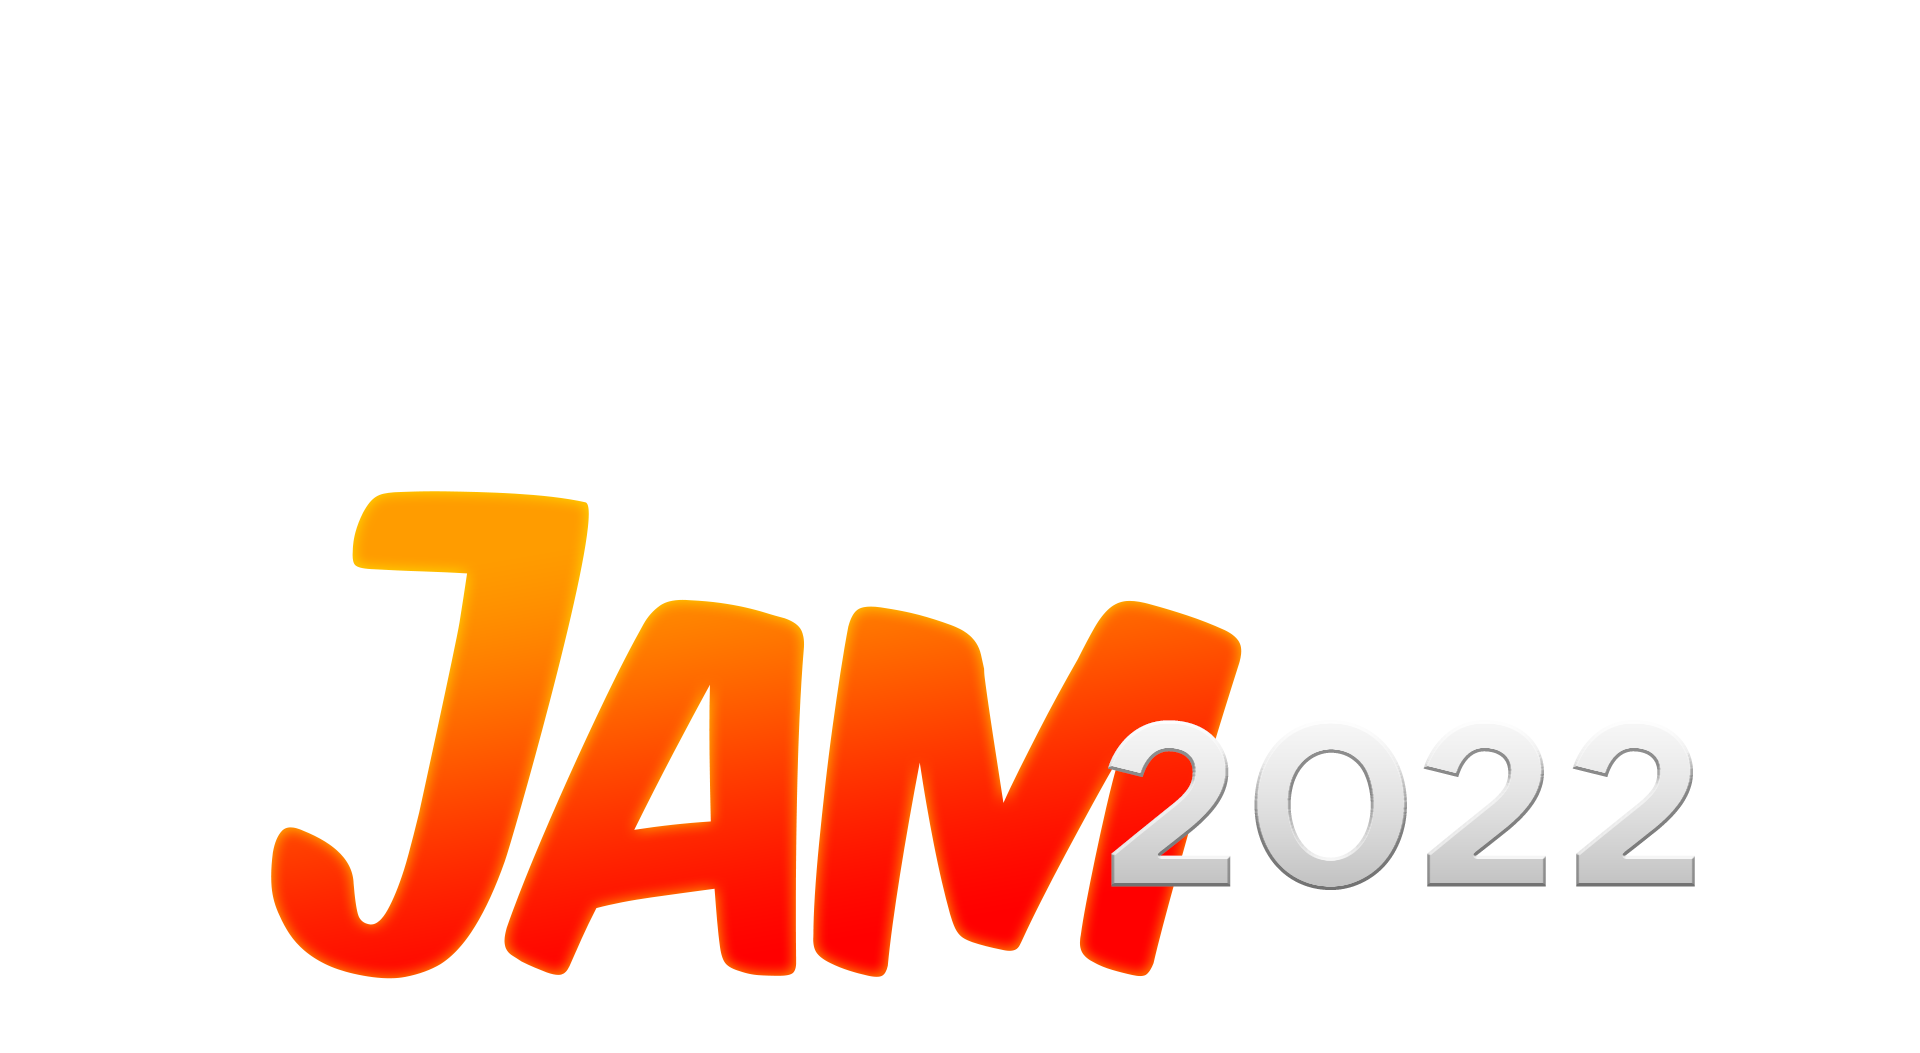 Roll it to the End - GMTK Game Jam 2022 - the first jam I